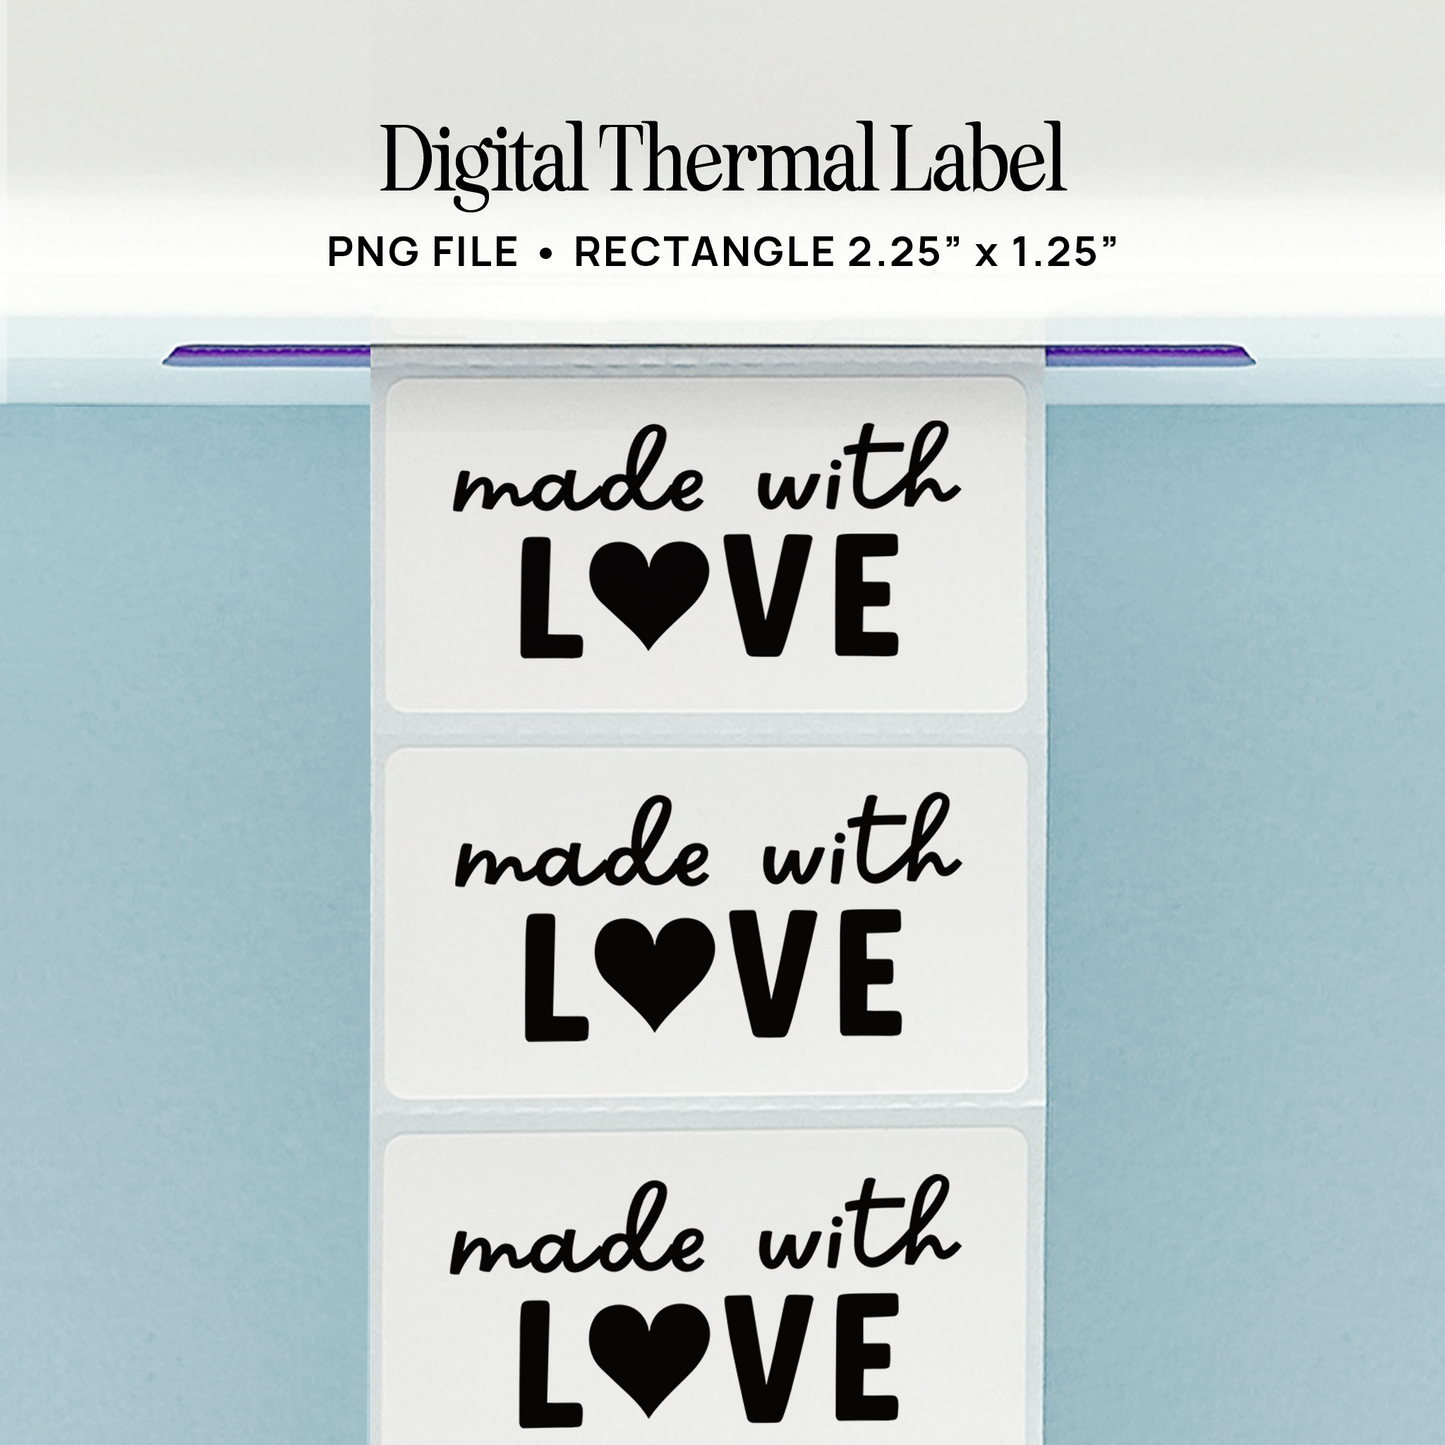 Made with Love - Rectangle Digital Thermal Label